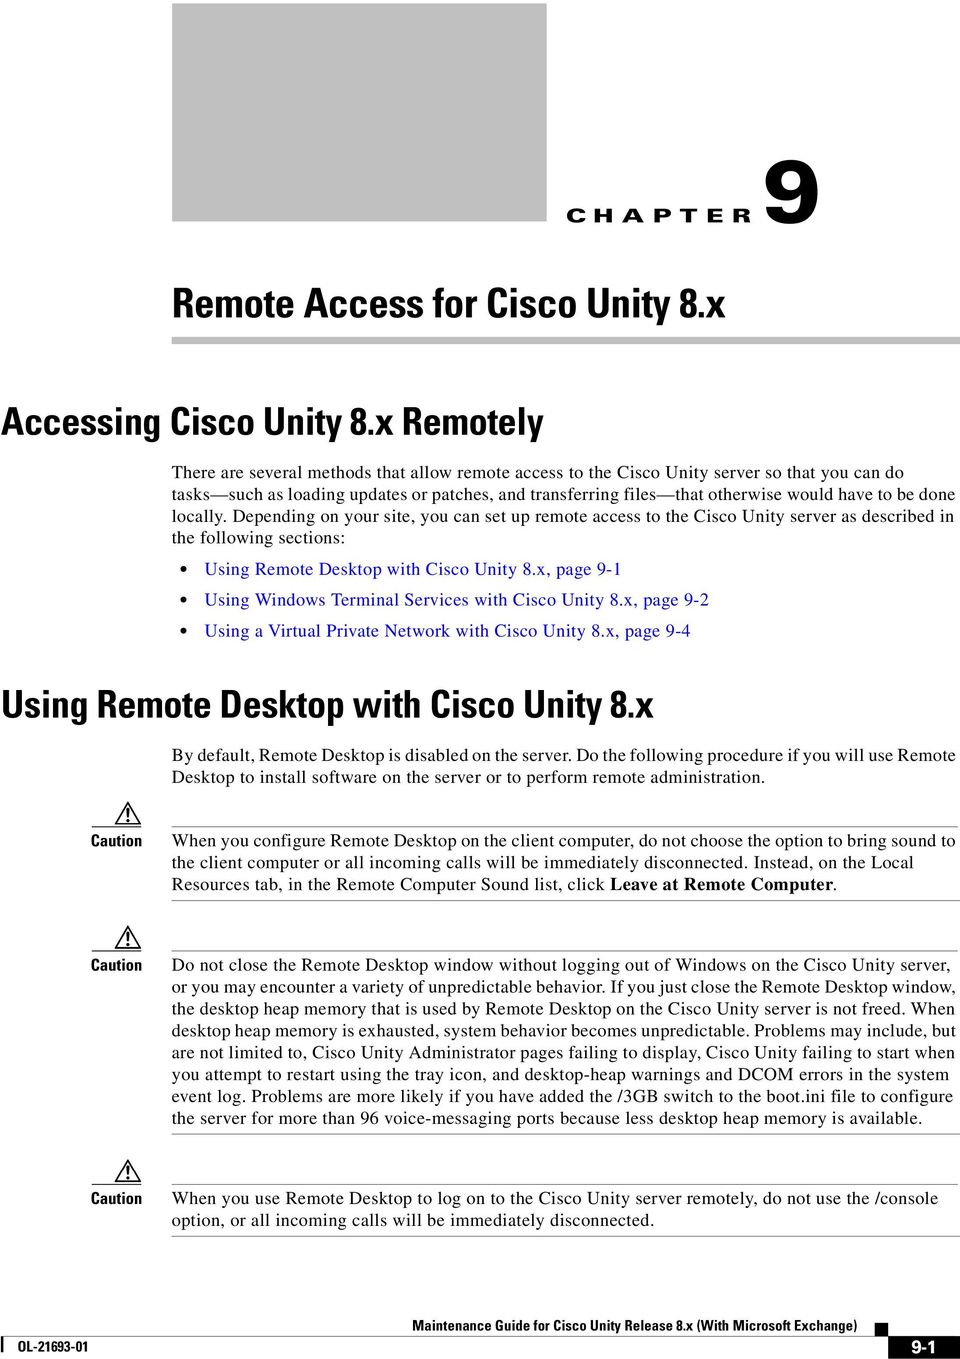 to be done locally. Depending on your site, you can set up remote access to the Cisco Unity server as described in the following sections: Using Remote Desktop with Cisco Unity 8.